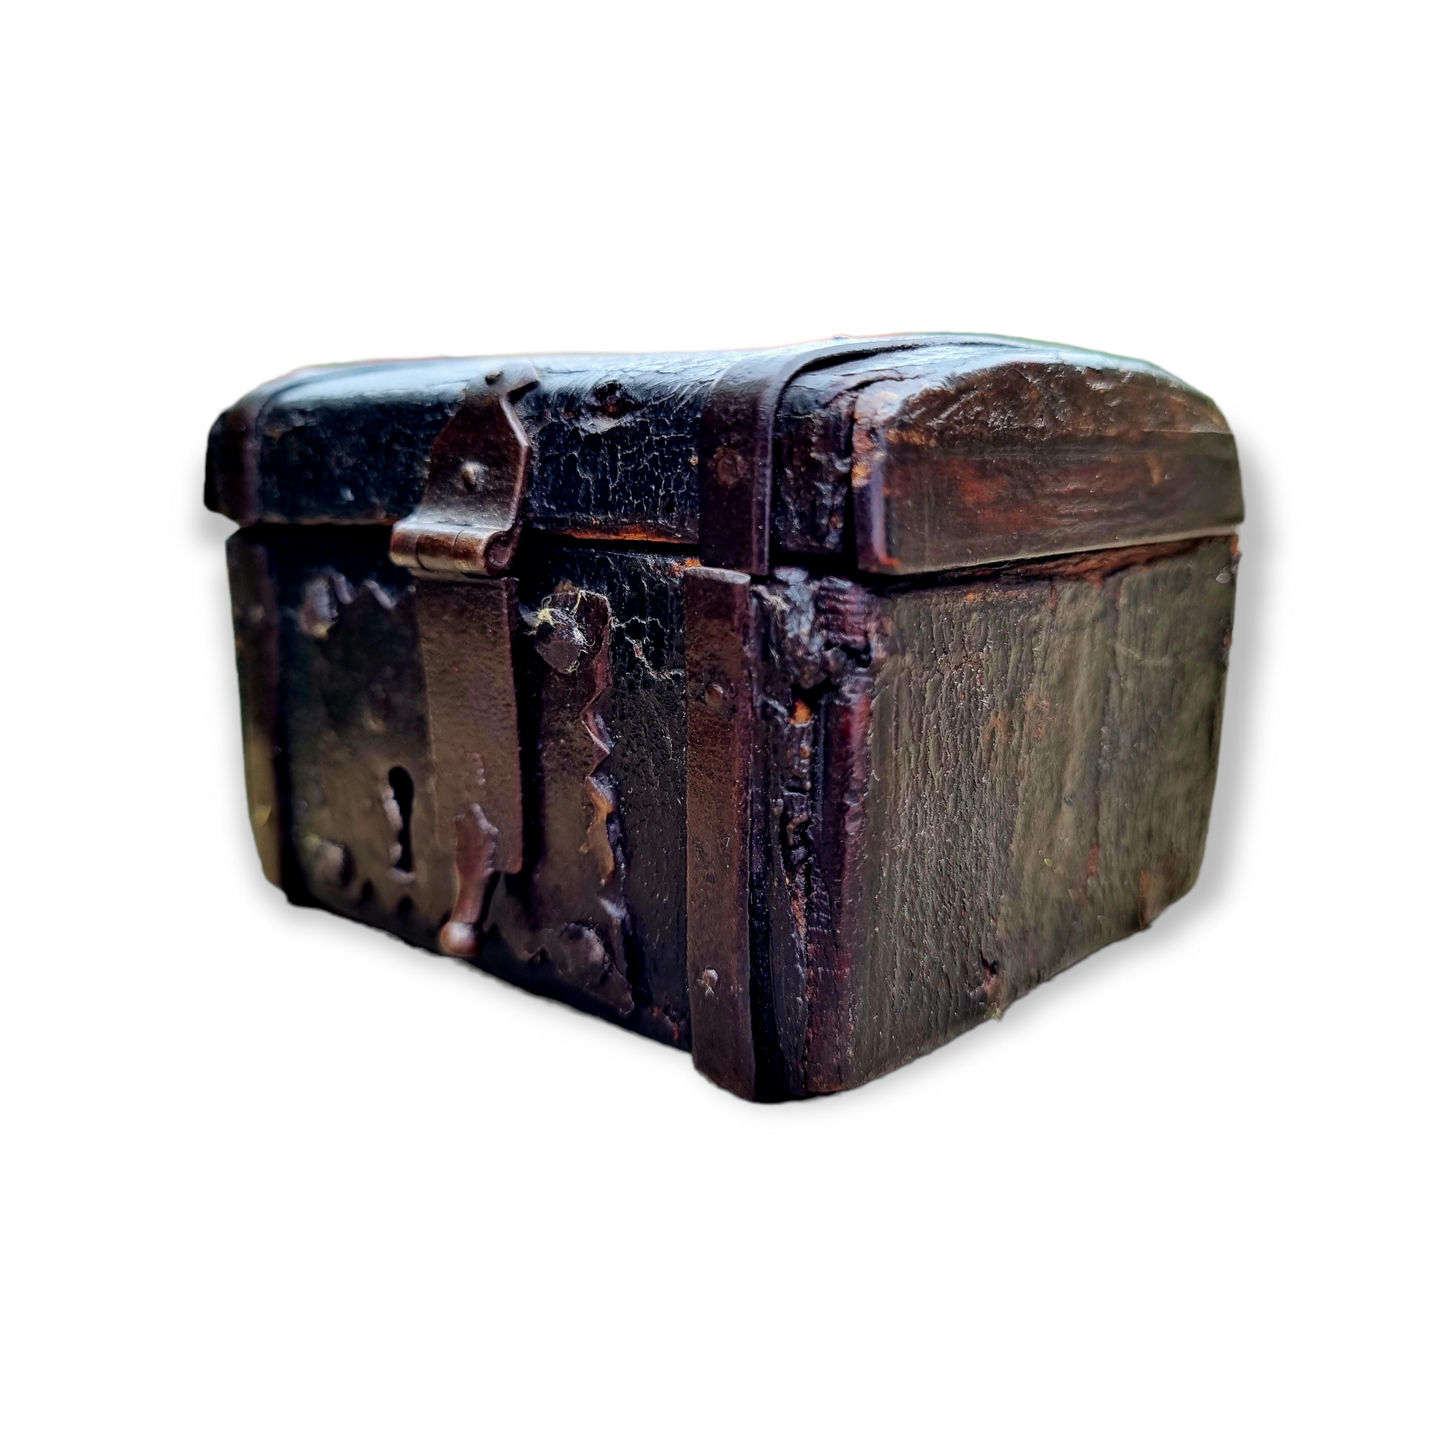 Diminutive 16th Century Antique Leather and Iron-Bound Missal Box